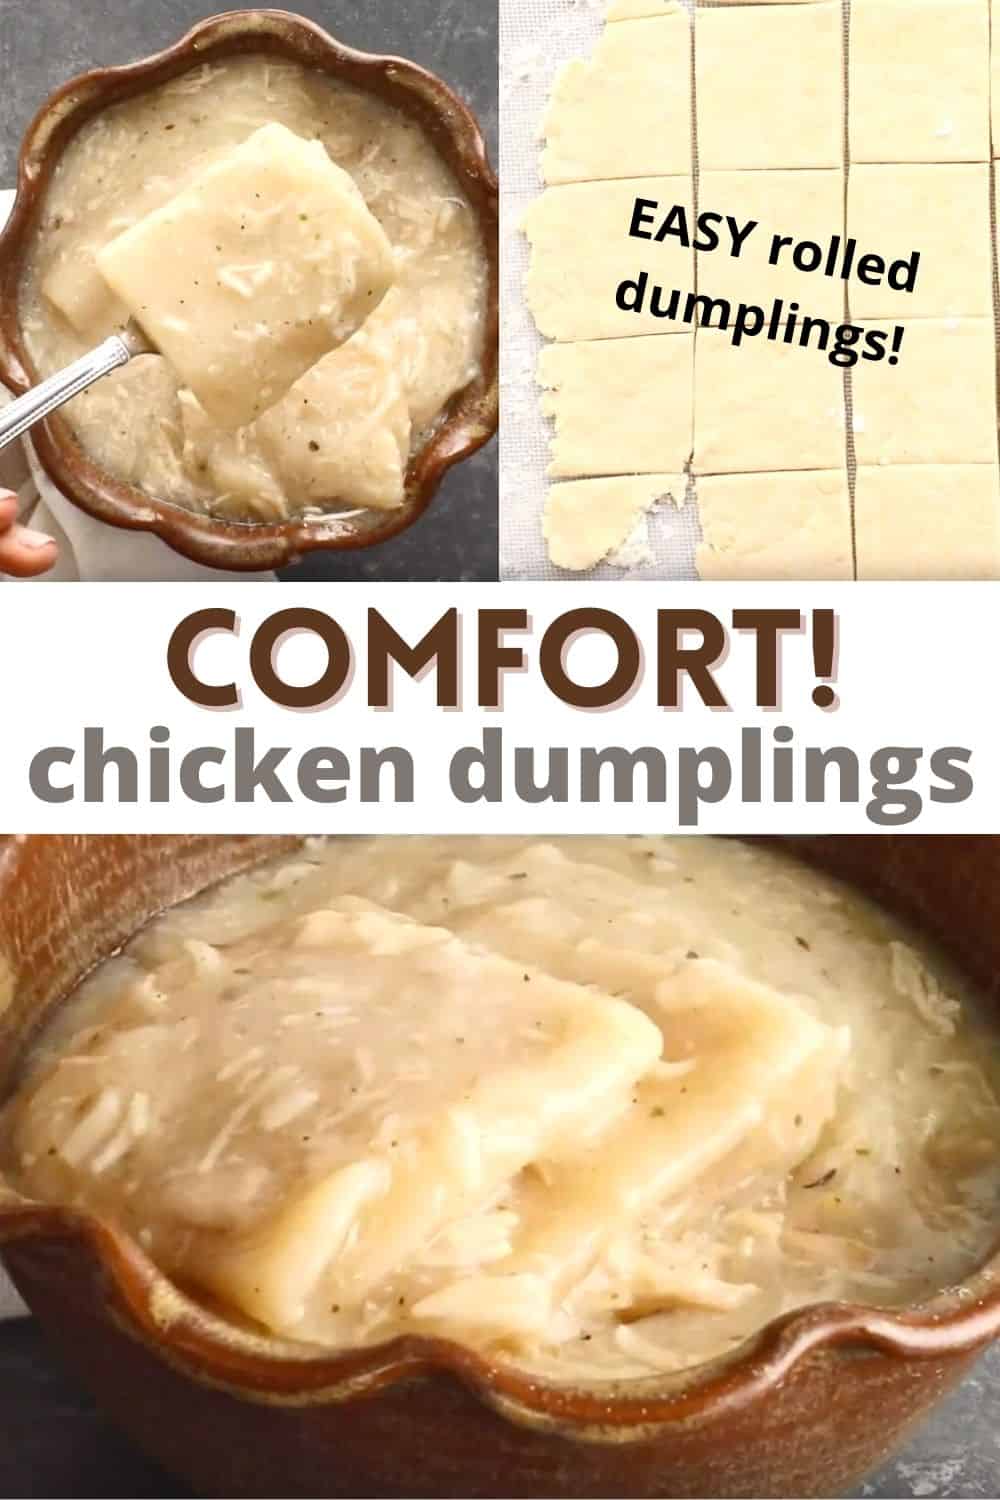 Southern Style Chicken and Dumplings